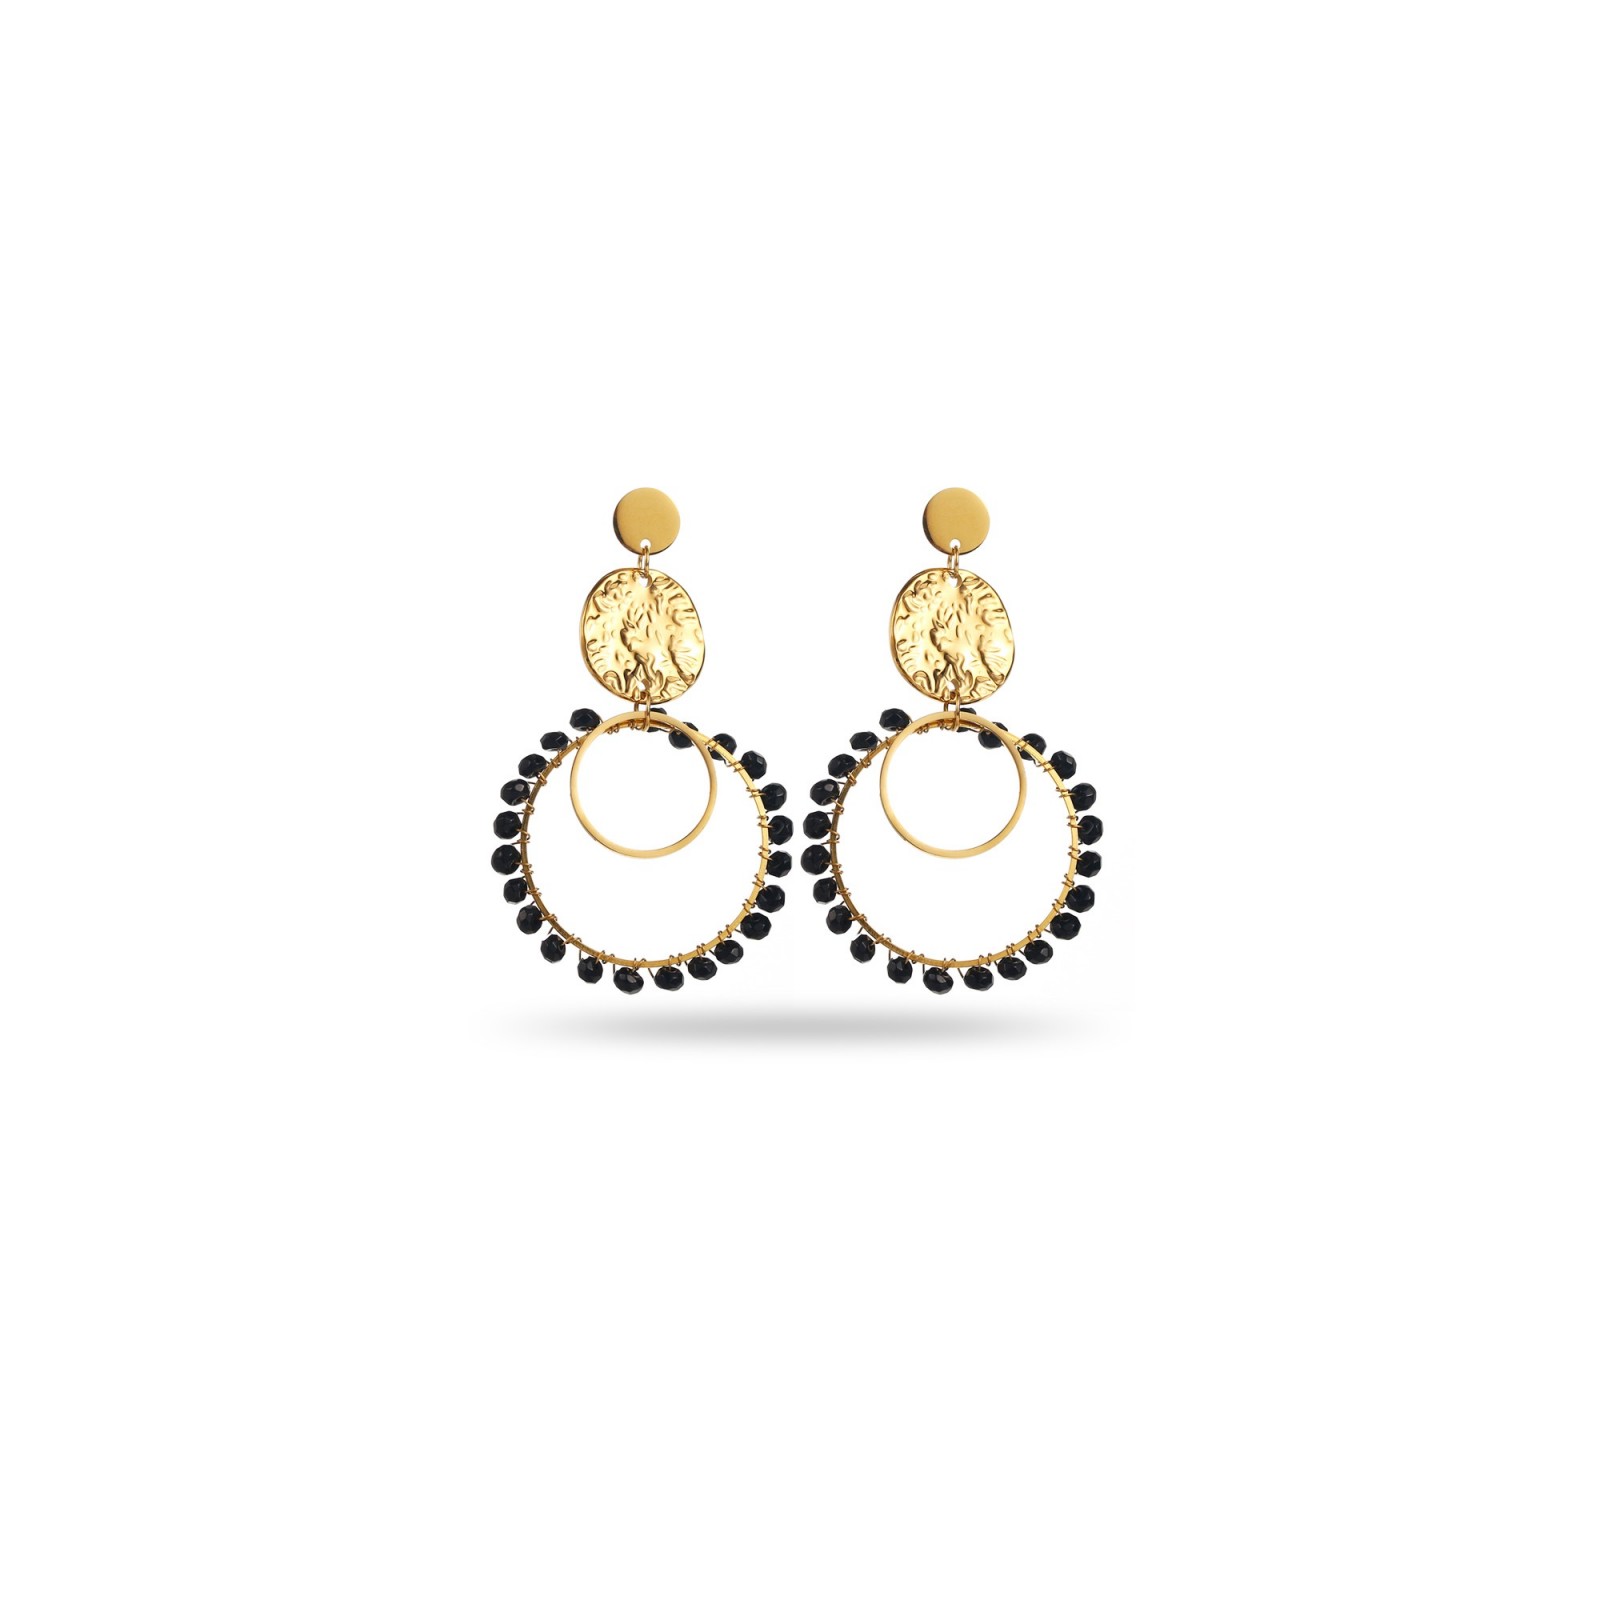 Hanging Earrings with Circles and Natural Stone Stone:Onyx